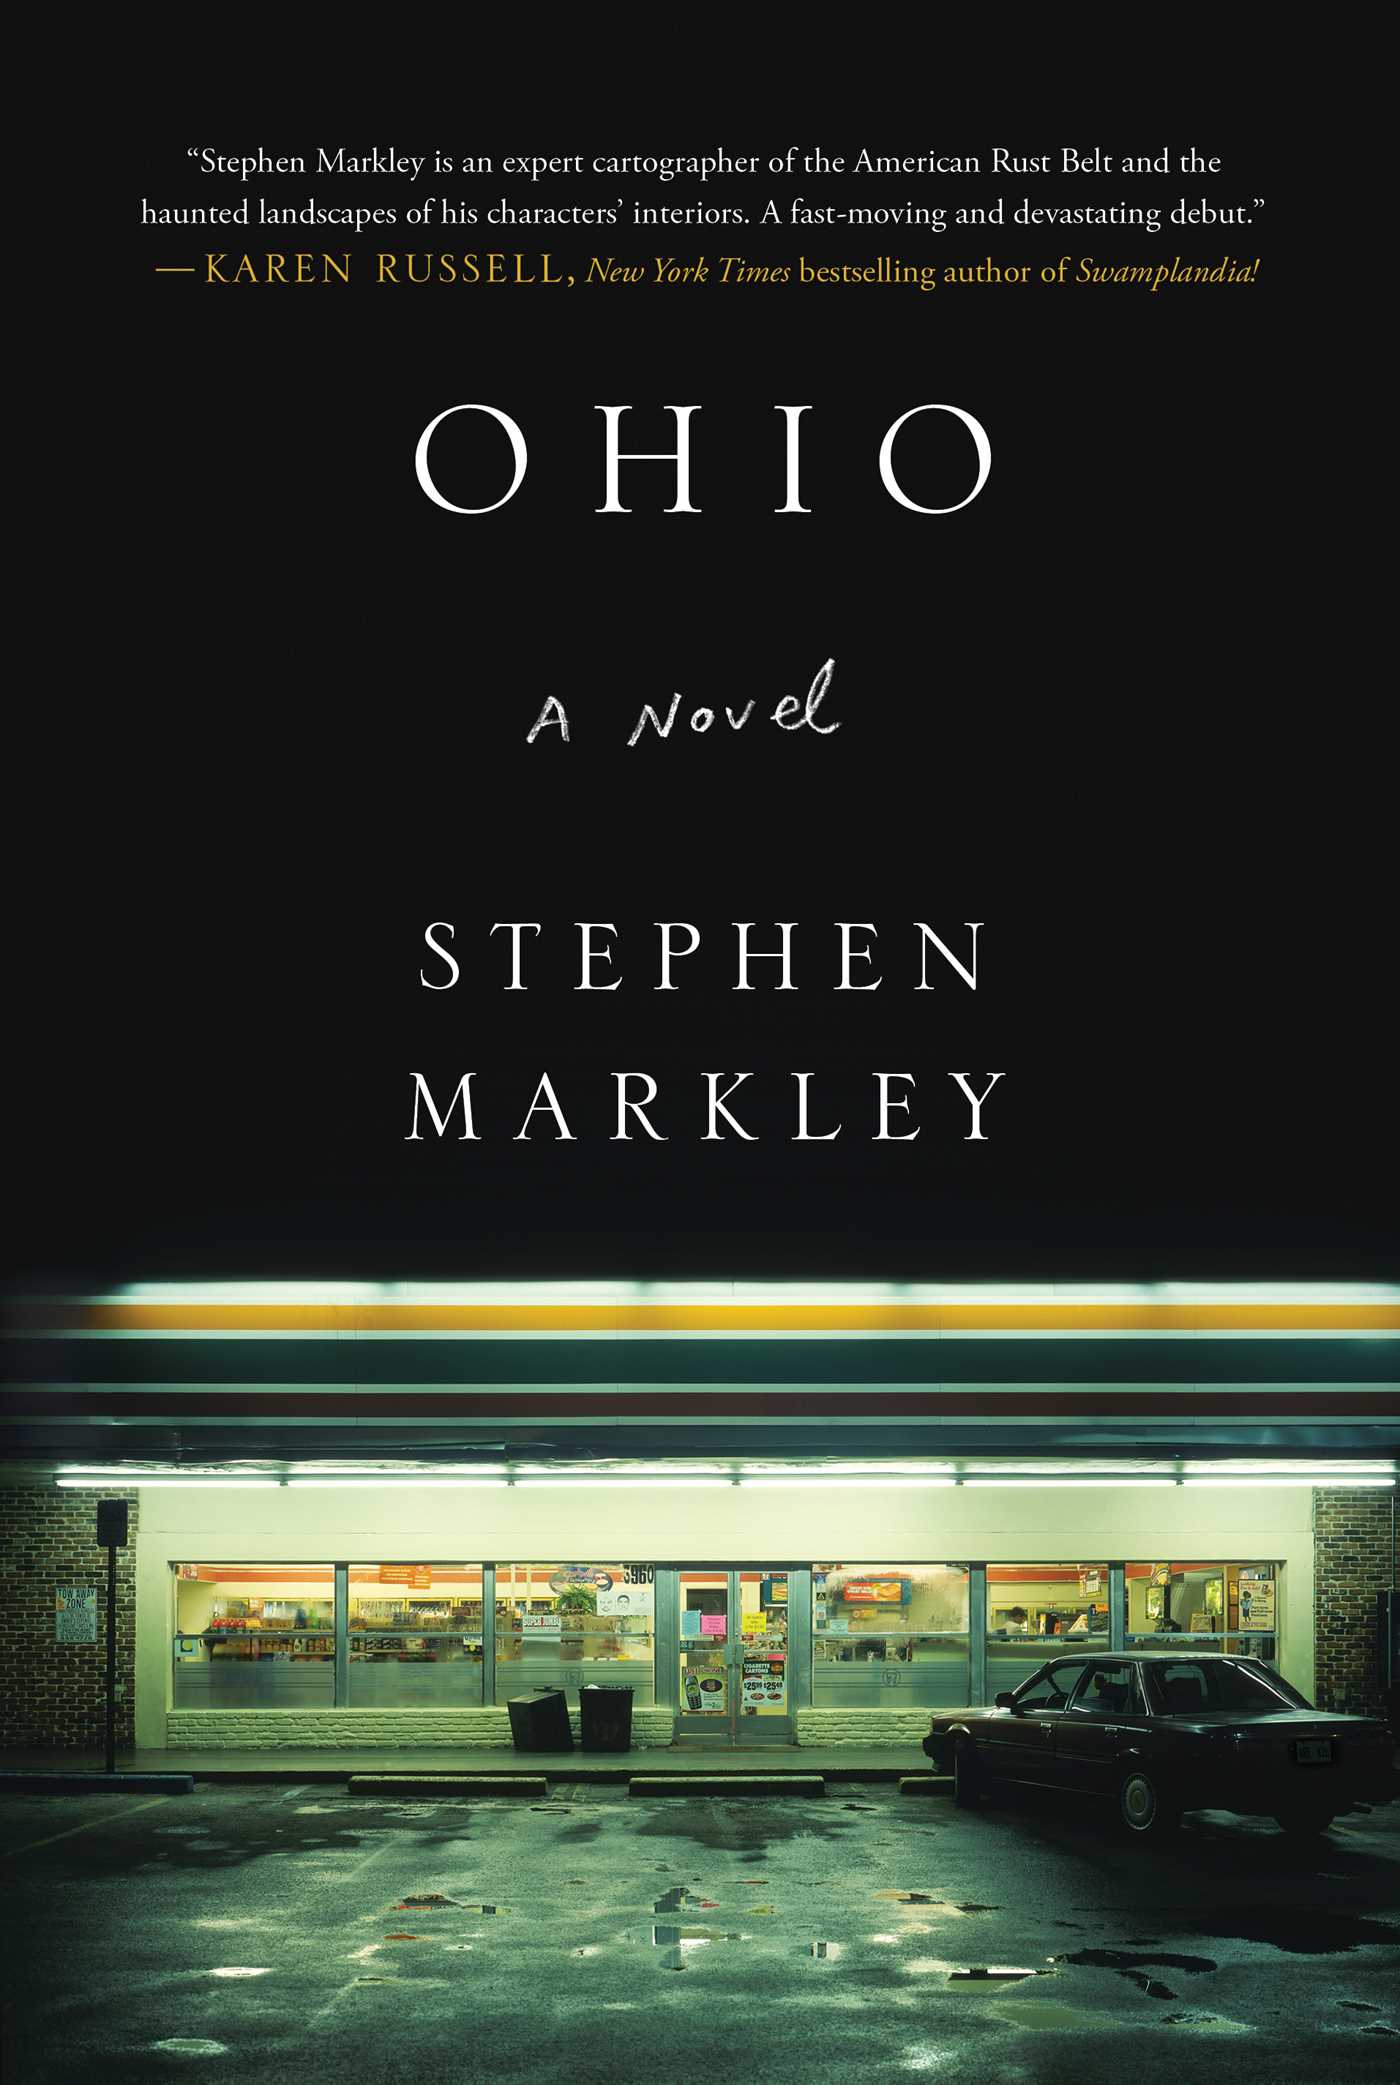 Ohio by Stephen Markley Book Review image